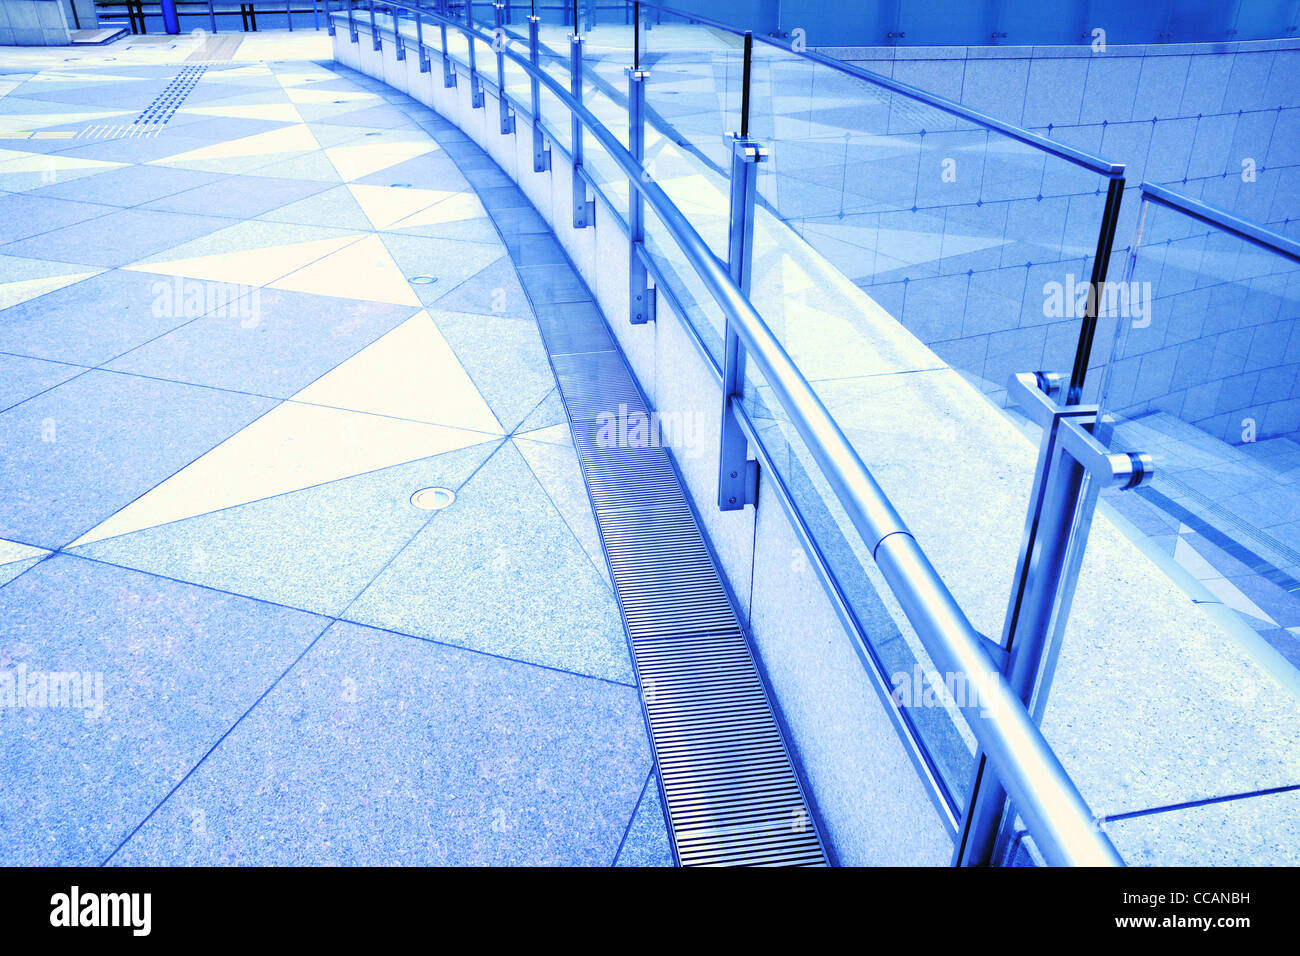 tiled floor, metallic handrails and glass fence fragments of modern urban square Stock Photo